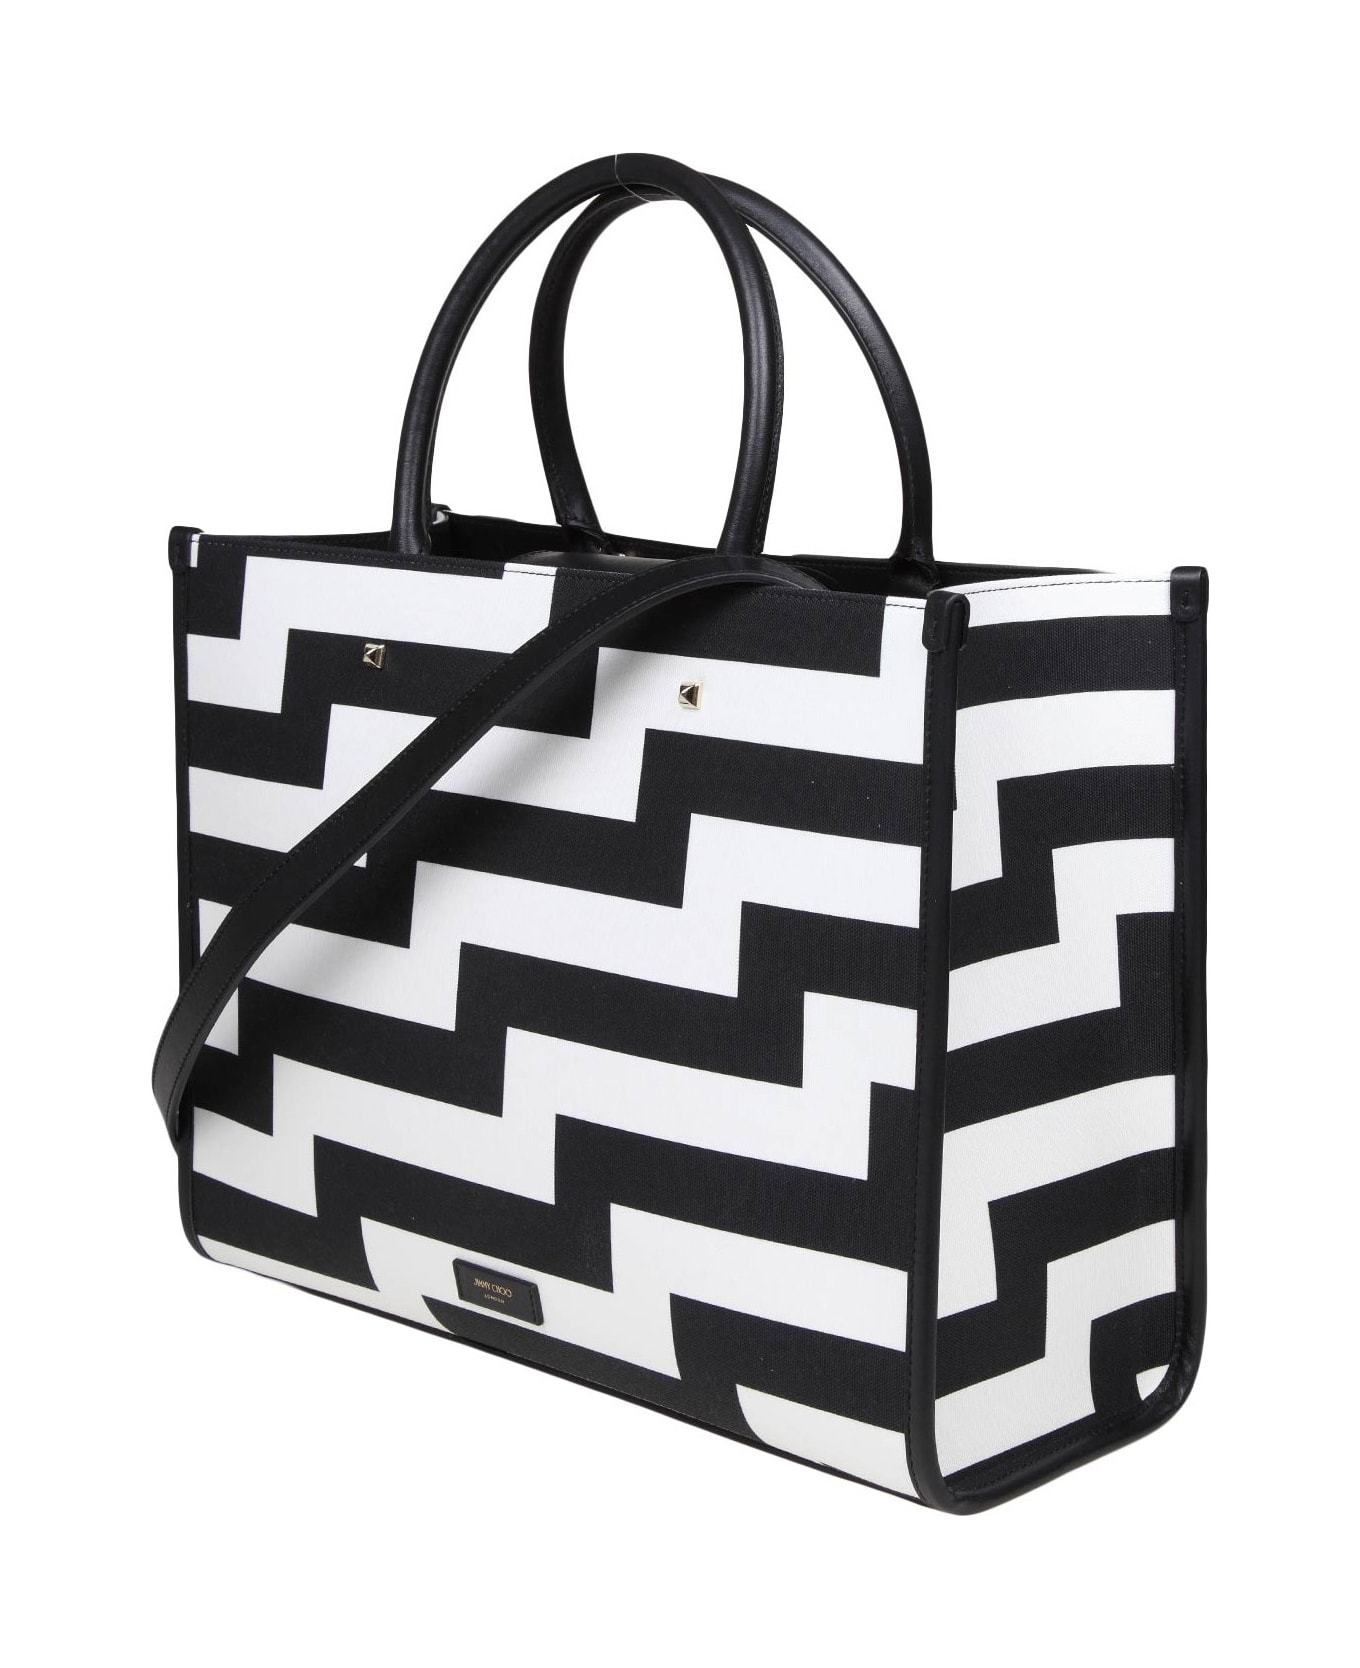 Jimmy Choo Avenue M Black And White Canvas And Leather Tote - Black/White トートバッグ